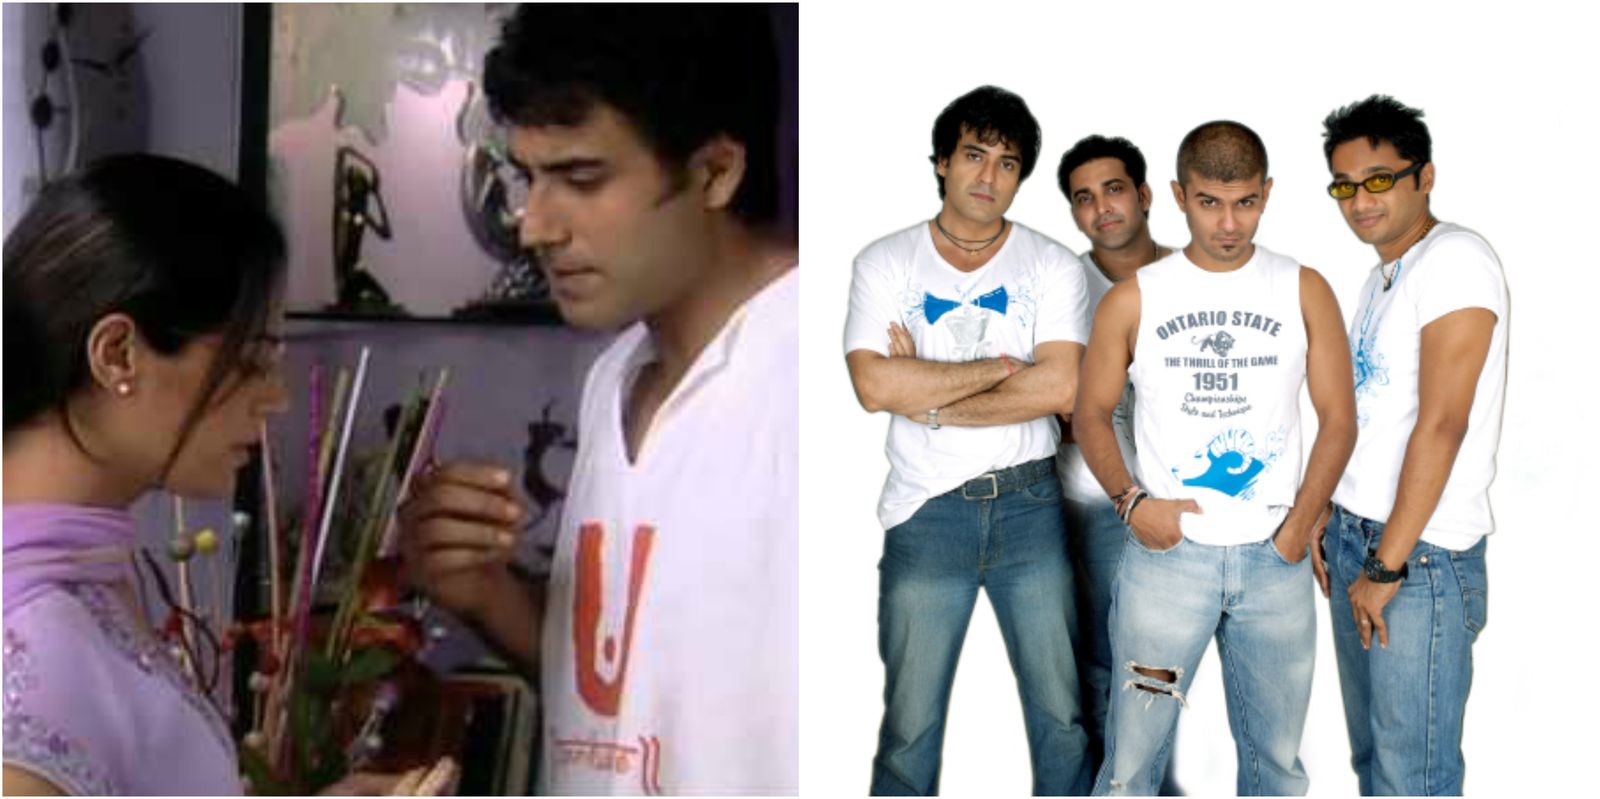 Remember Karan Oberoi From Jassi Jaisi Koi Nahi And Band Of Boys? Here's What He's Been Upto!